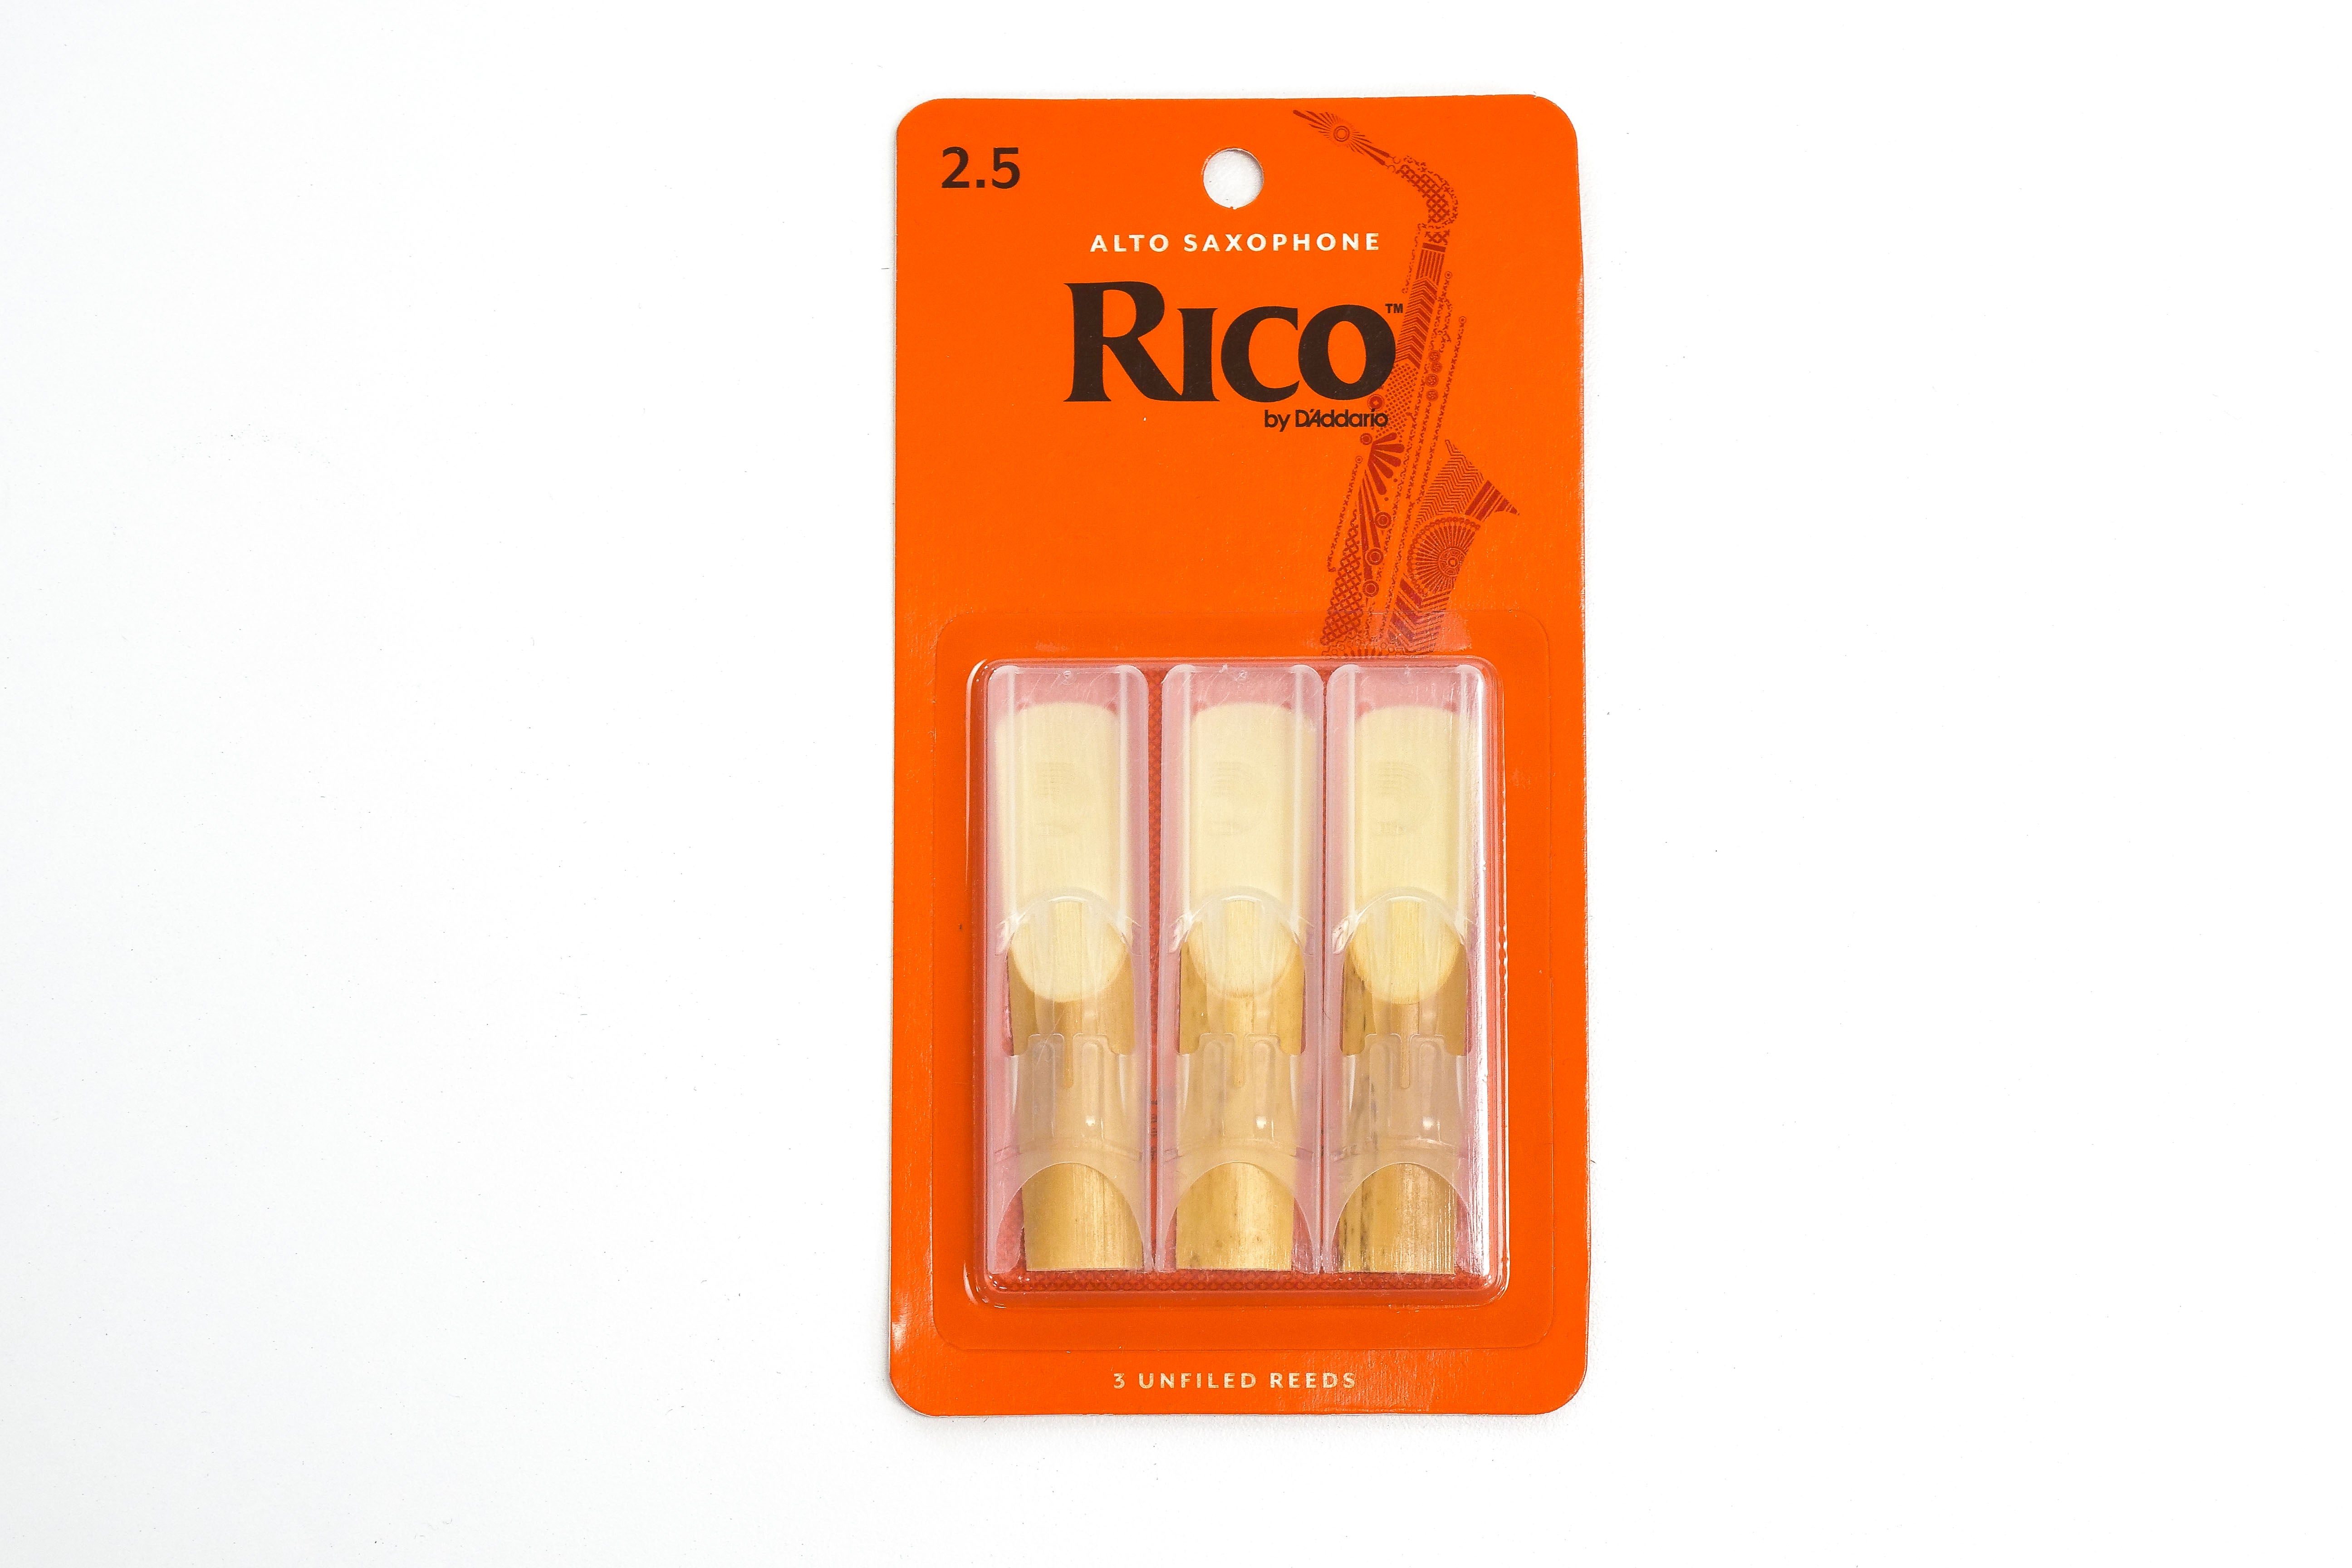 Rico by D'Addario Alto Saxophone Reeds Strength 2.5 - 3 Pack